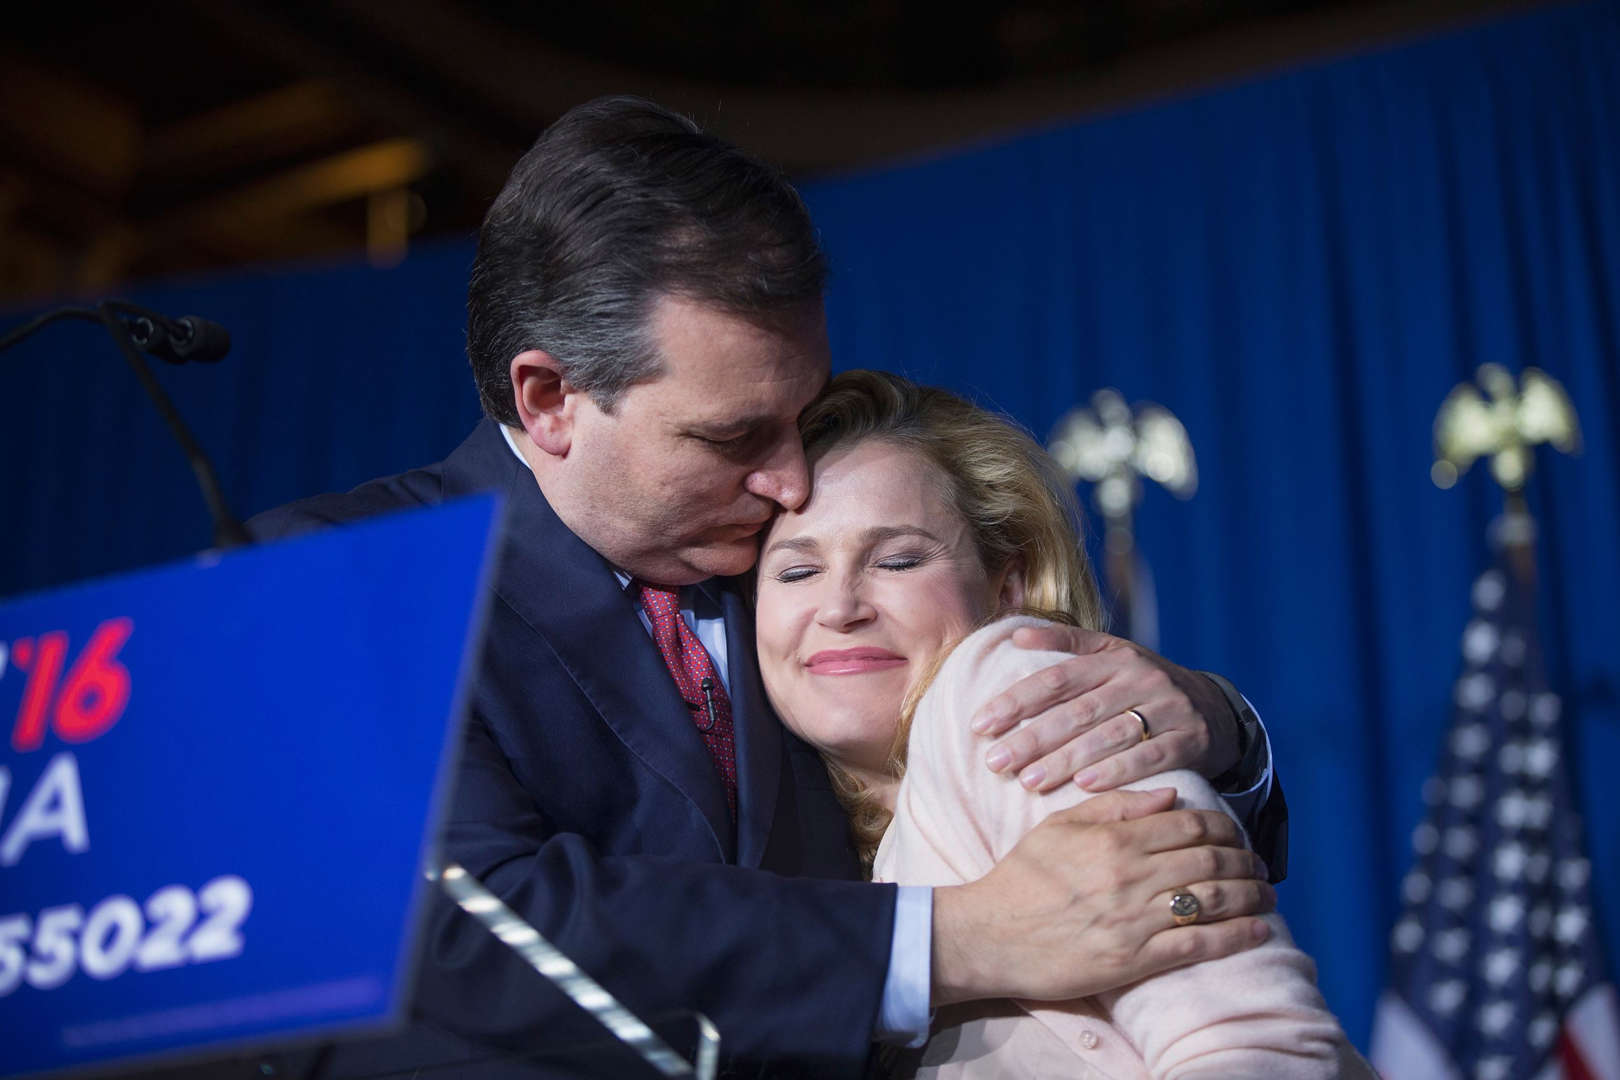 With his wife Heidi by his side, Republican presidential candidate Sen. Ted Cruz (R-TX) speaks during his election night watch party at the Crowne Plaza Downtown Union Station where he announced he was suspending his bid for the Republican presidential nomination on May 3, 2016 in Indianapolis, Indiana.